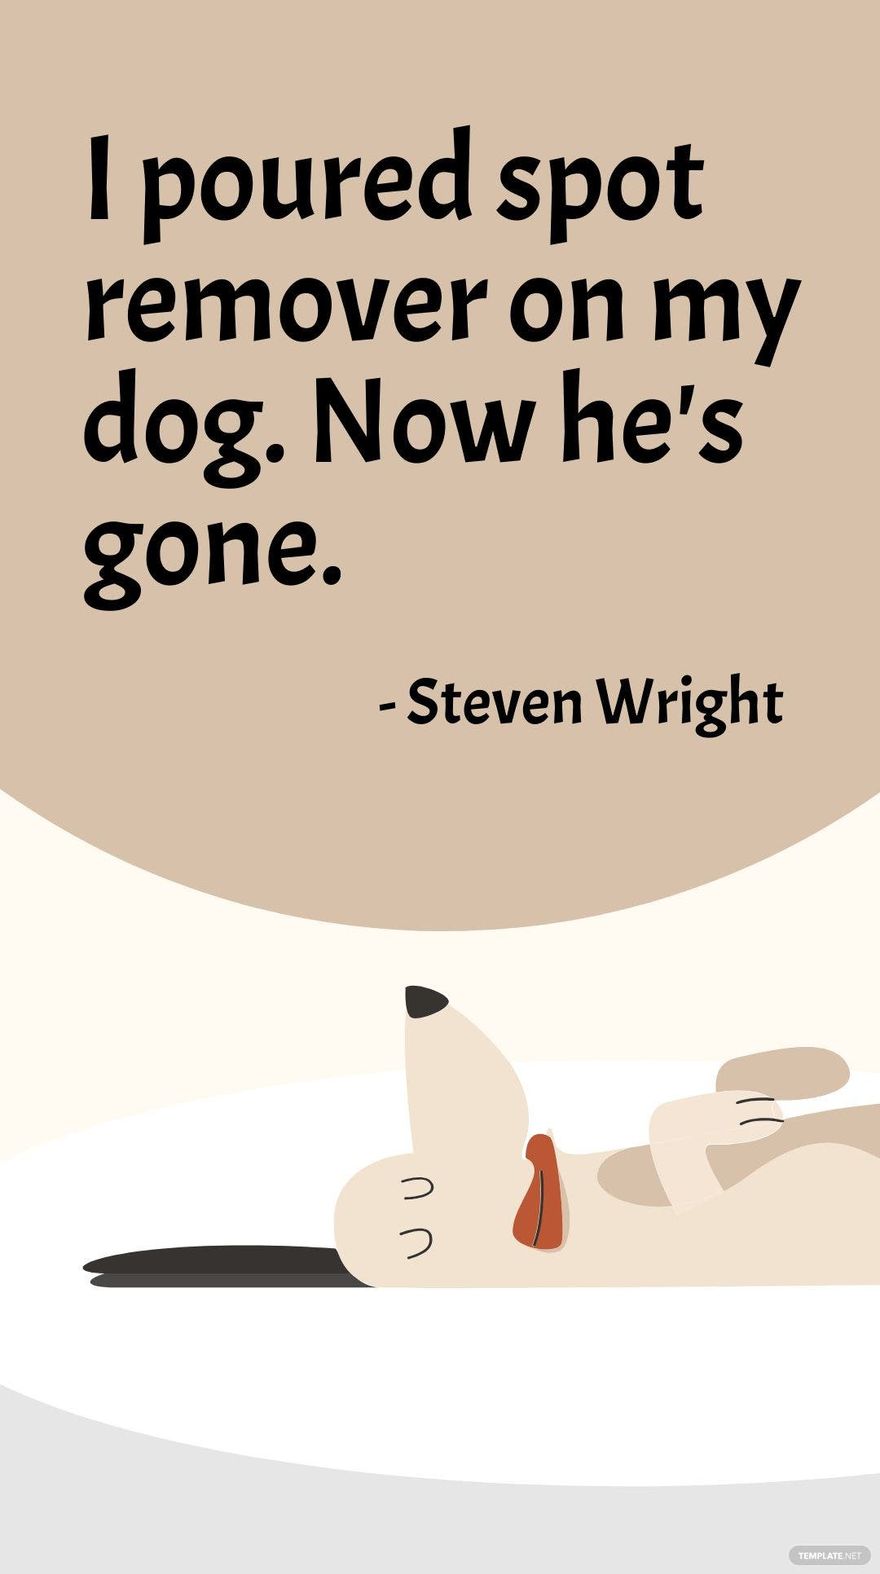 Steven Wright - I poured spot remover on my dog. Now he's gone.